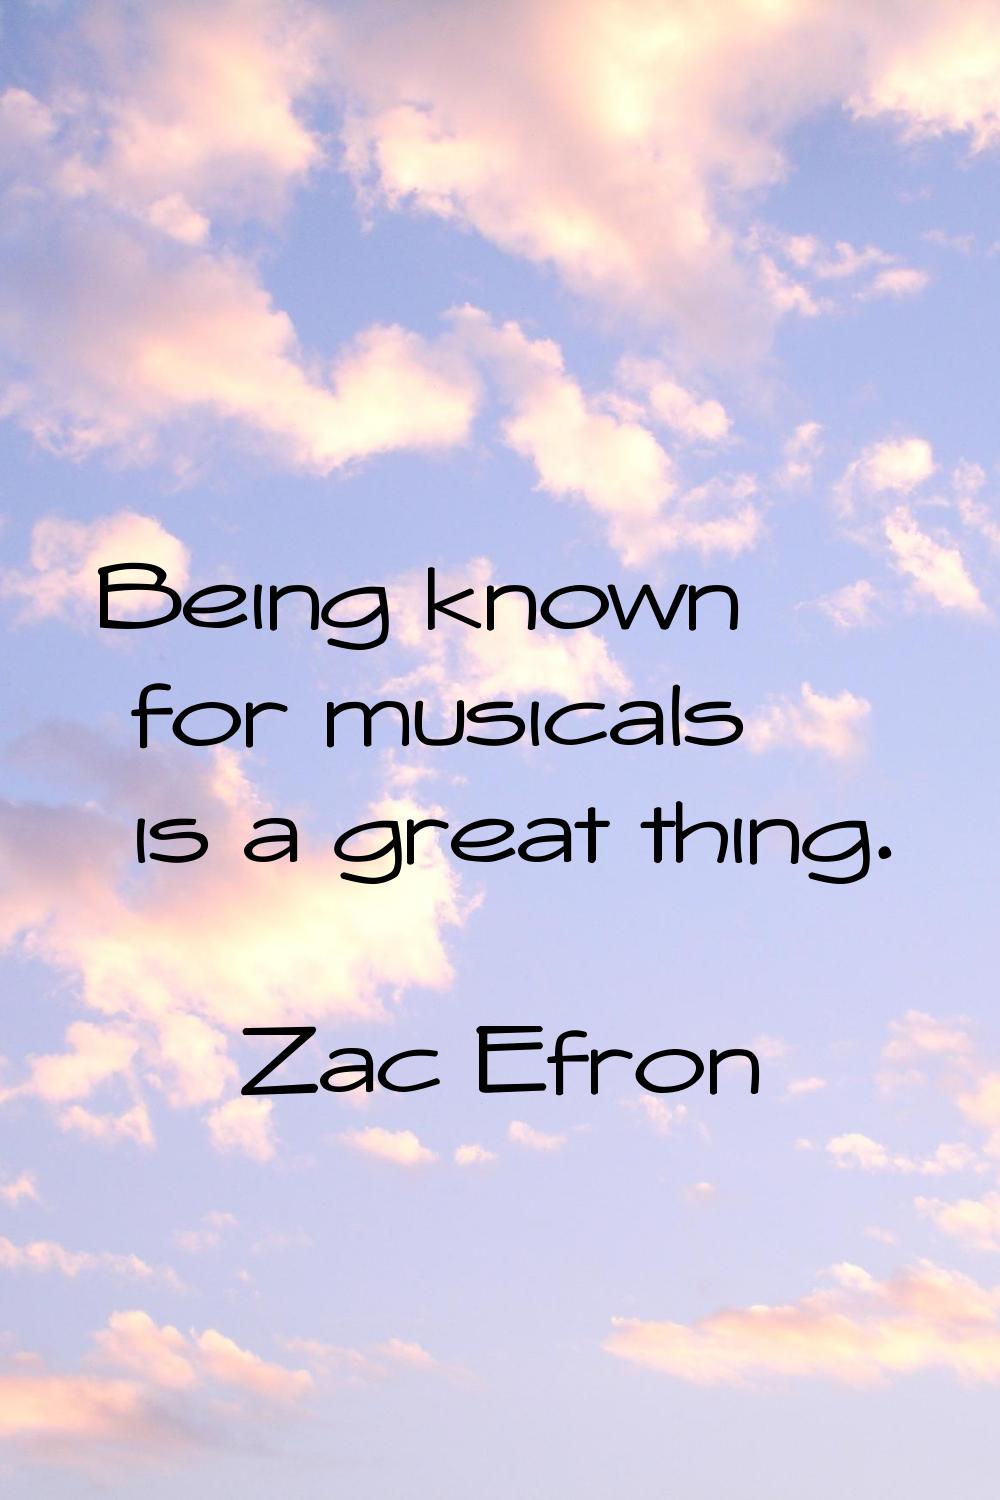 Being known for musicals is a great thing.